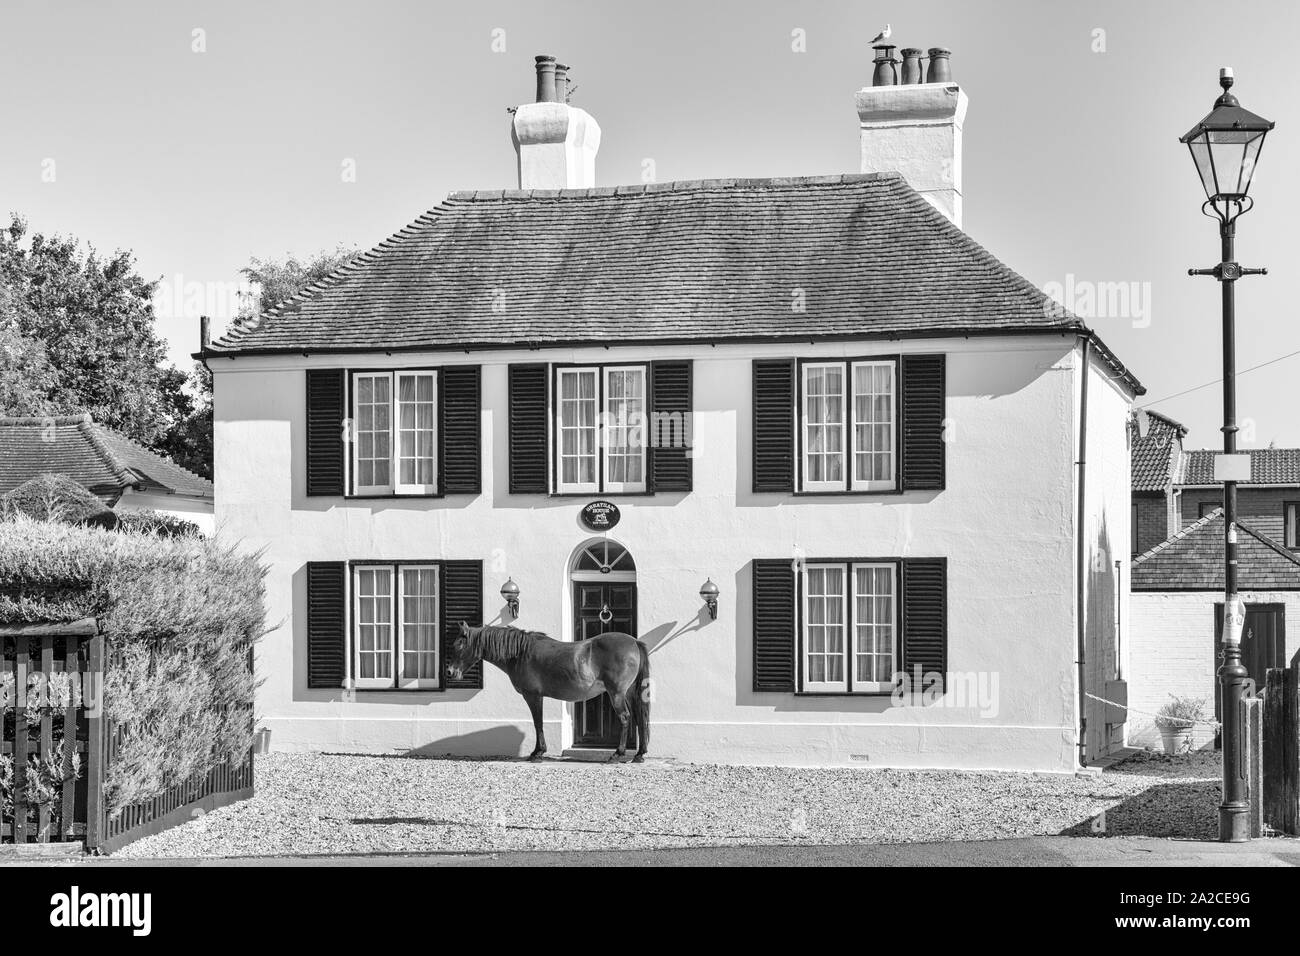 Who's looking through the window - horse standing outside Greatham House at Brockenhurst, New Forest, Hampshire, UK on a warm sunny day in September Stock Photo